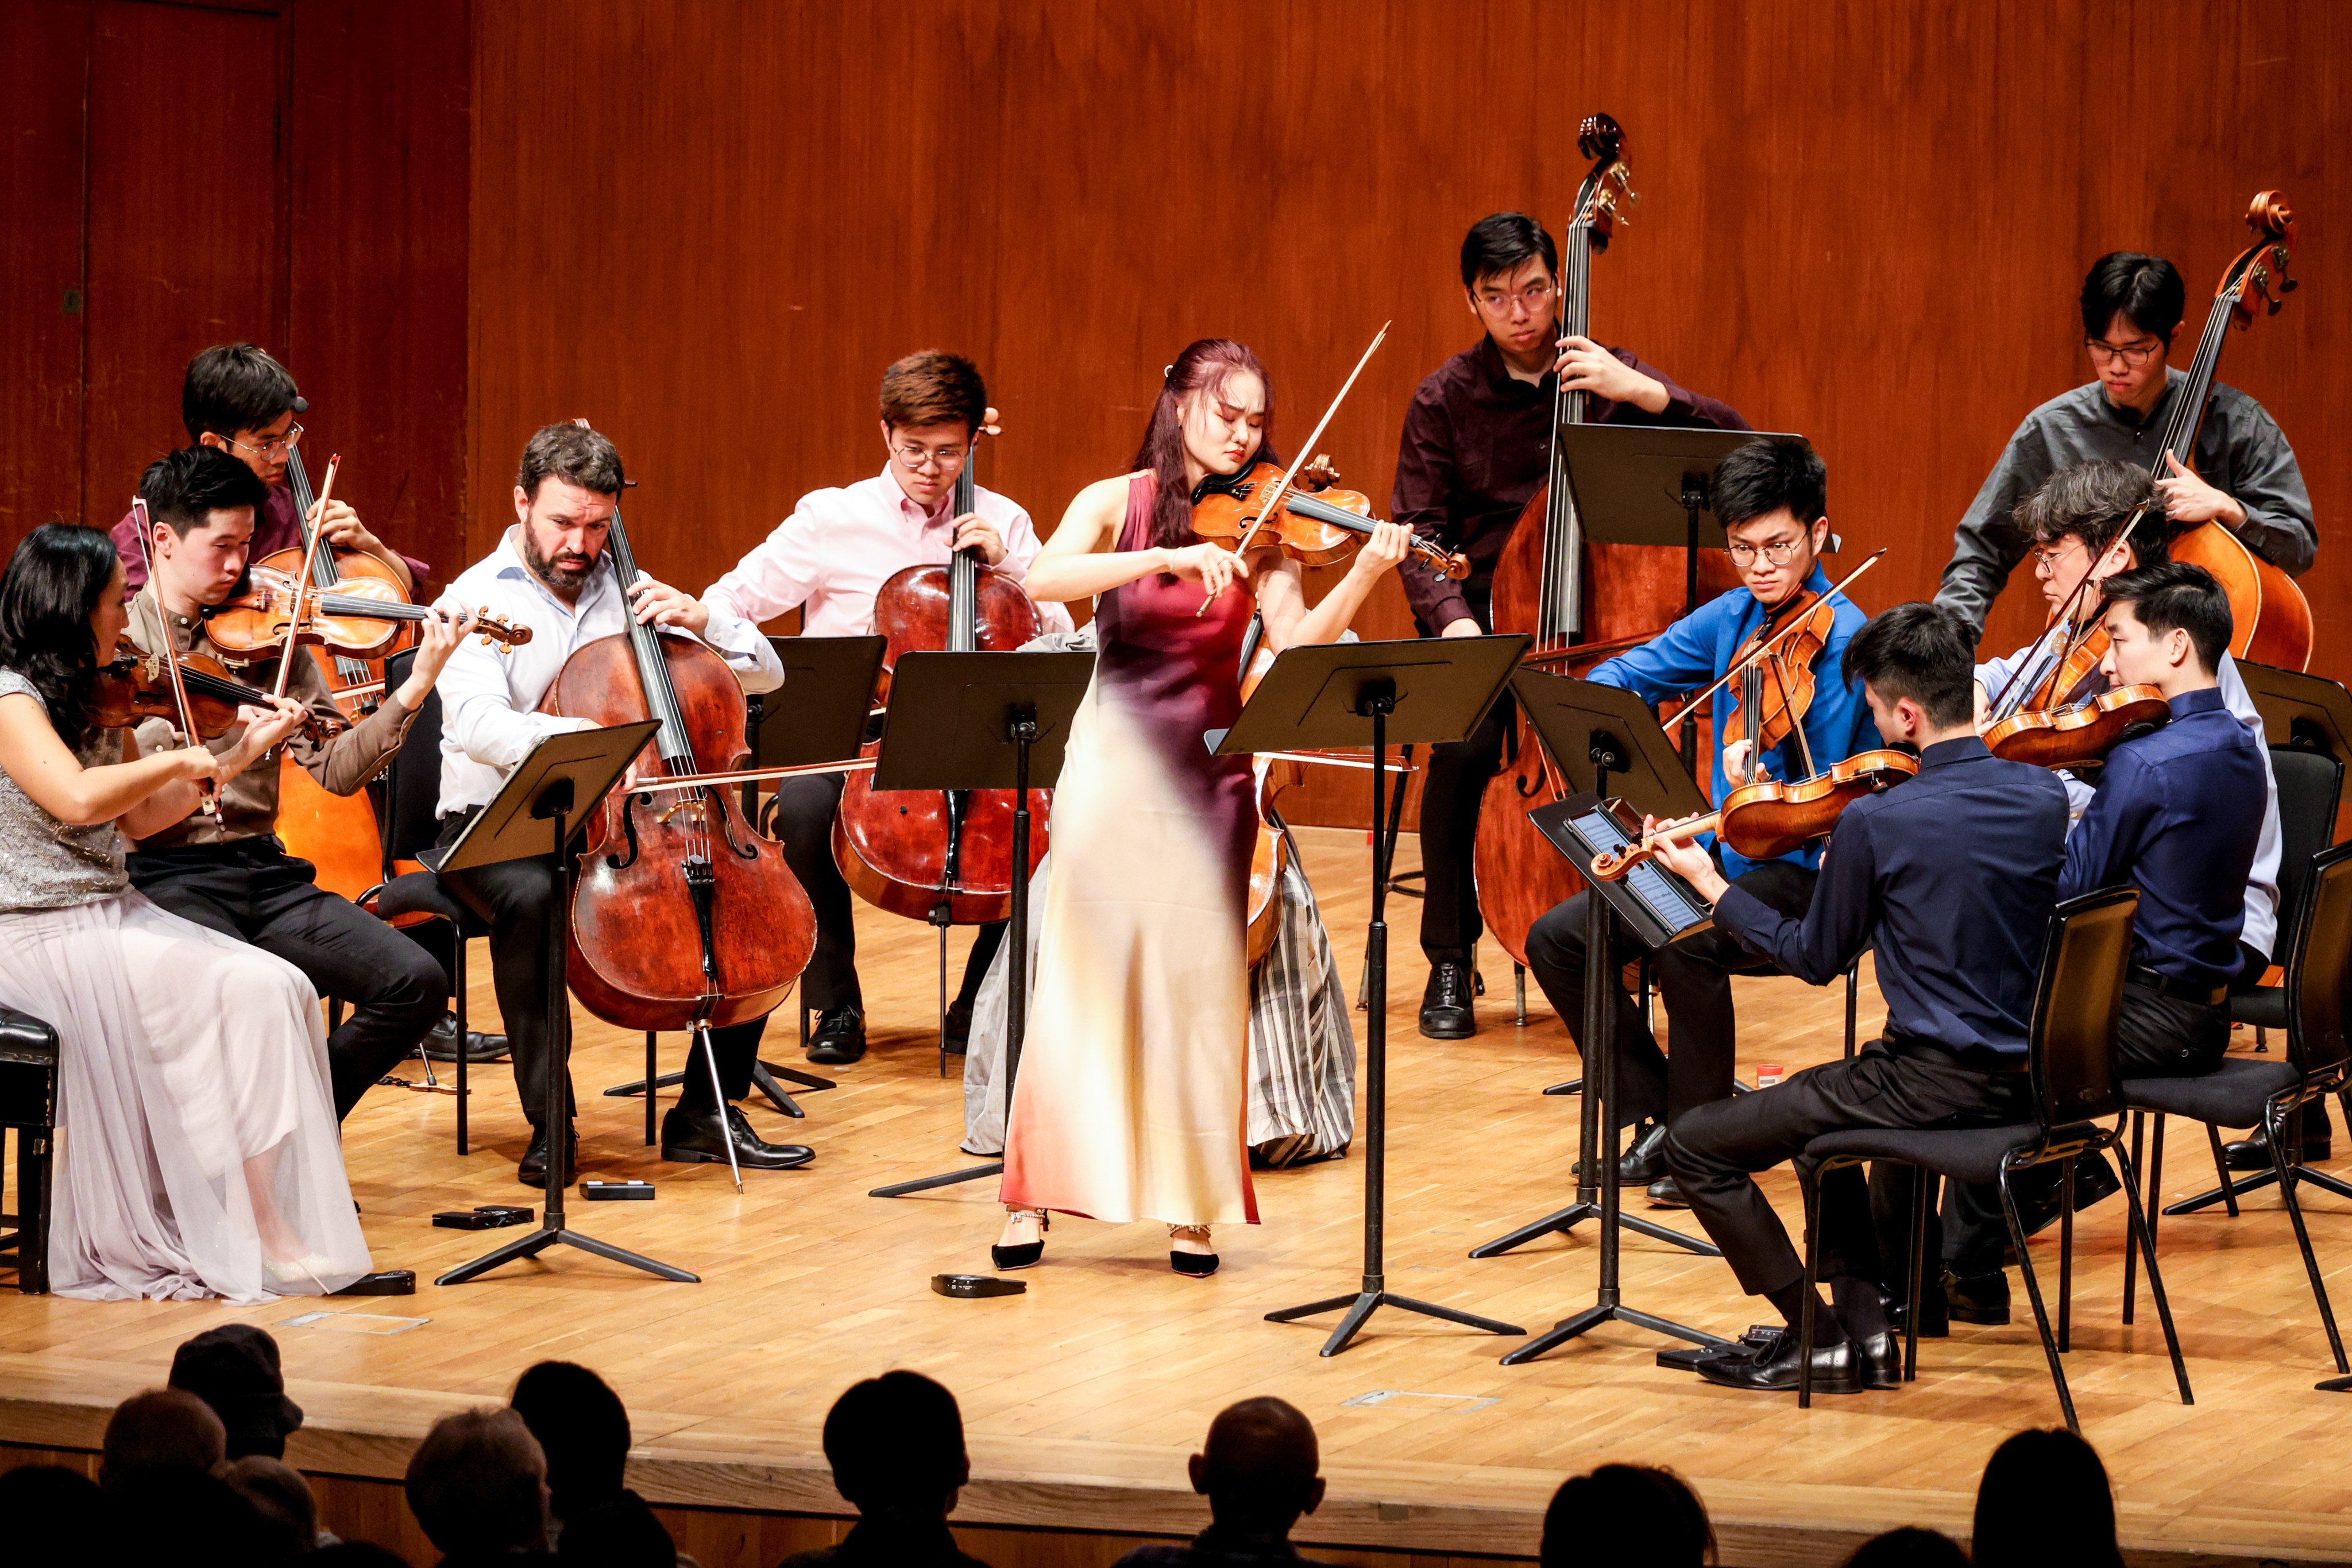 Violin soloist Angela Chan and fellow members of Musicus Soloists Hong Kong perform Estonian “holy minimalist” composer Arvo Pärt’s “Fratres for Violin, Strings and Percussion“ during their concert of Nordic music at Hong Kong City Hall Concert Hall on November 21, 2023. Photo: Musicus Fest